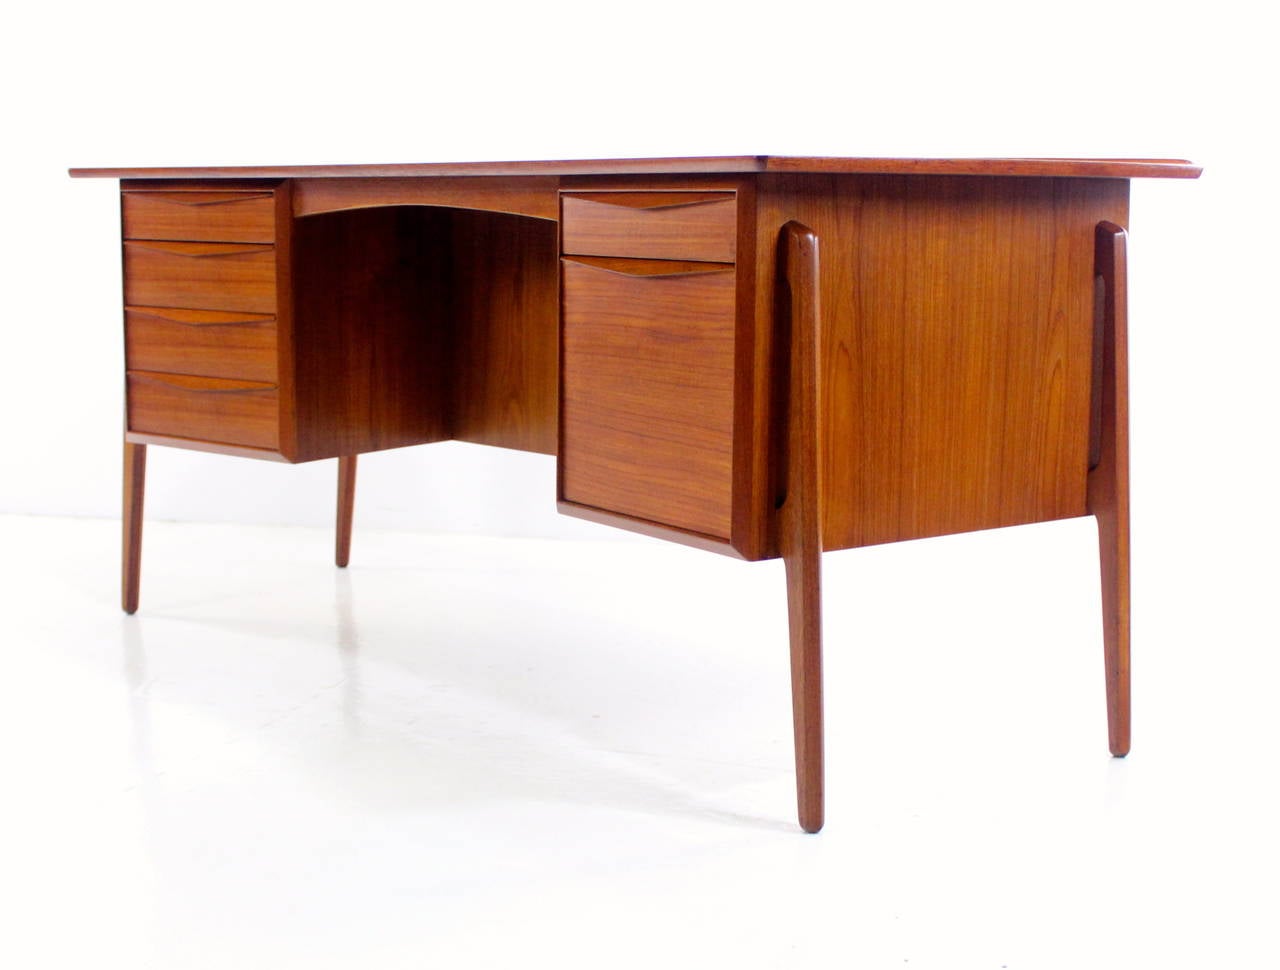 Danish modern desk designed by Svend Madsen.
Richly grained teak, beautifully engineered and crafted.
Curved form with raised lip on back edge, provides maximum style and function.
Four drawers on the left.
Two drawers on the right - the bottom